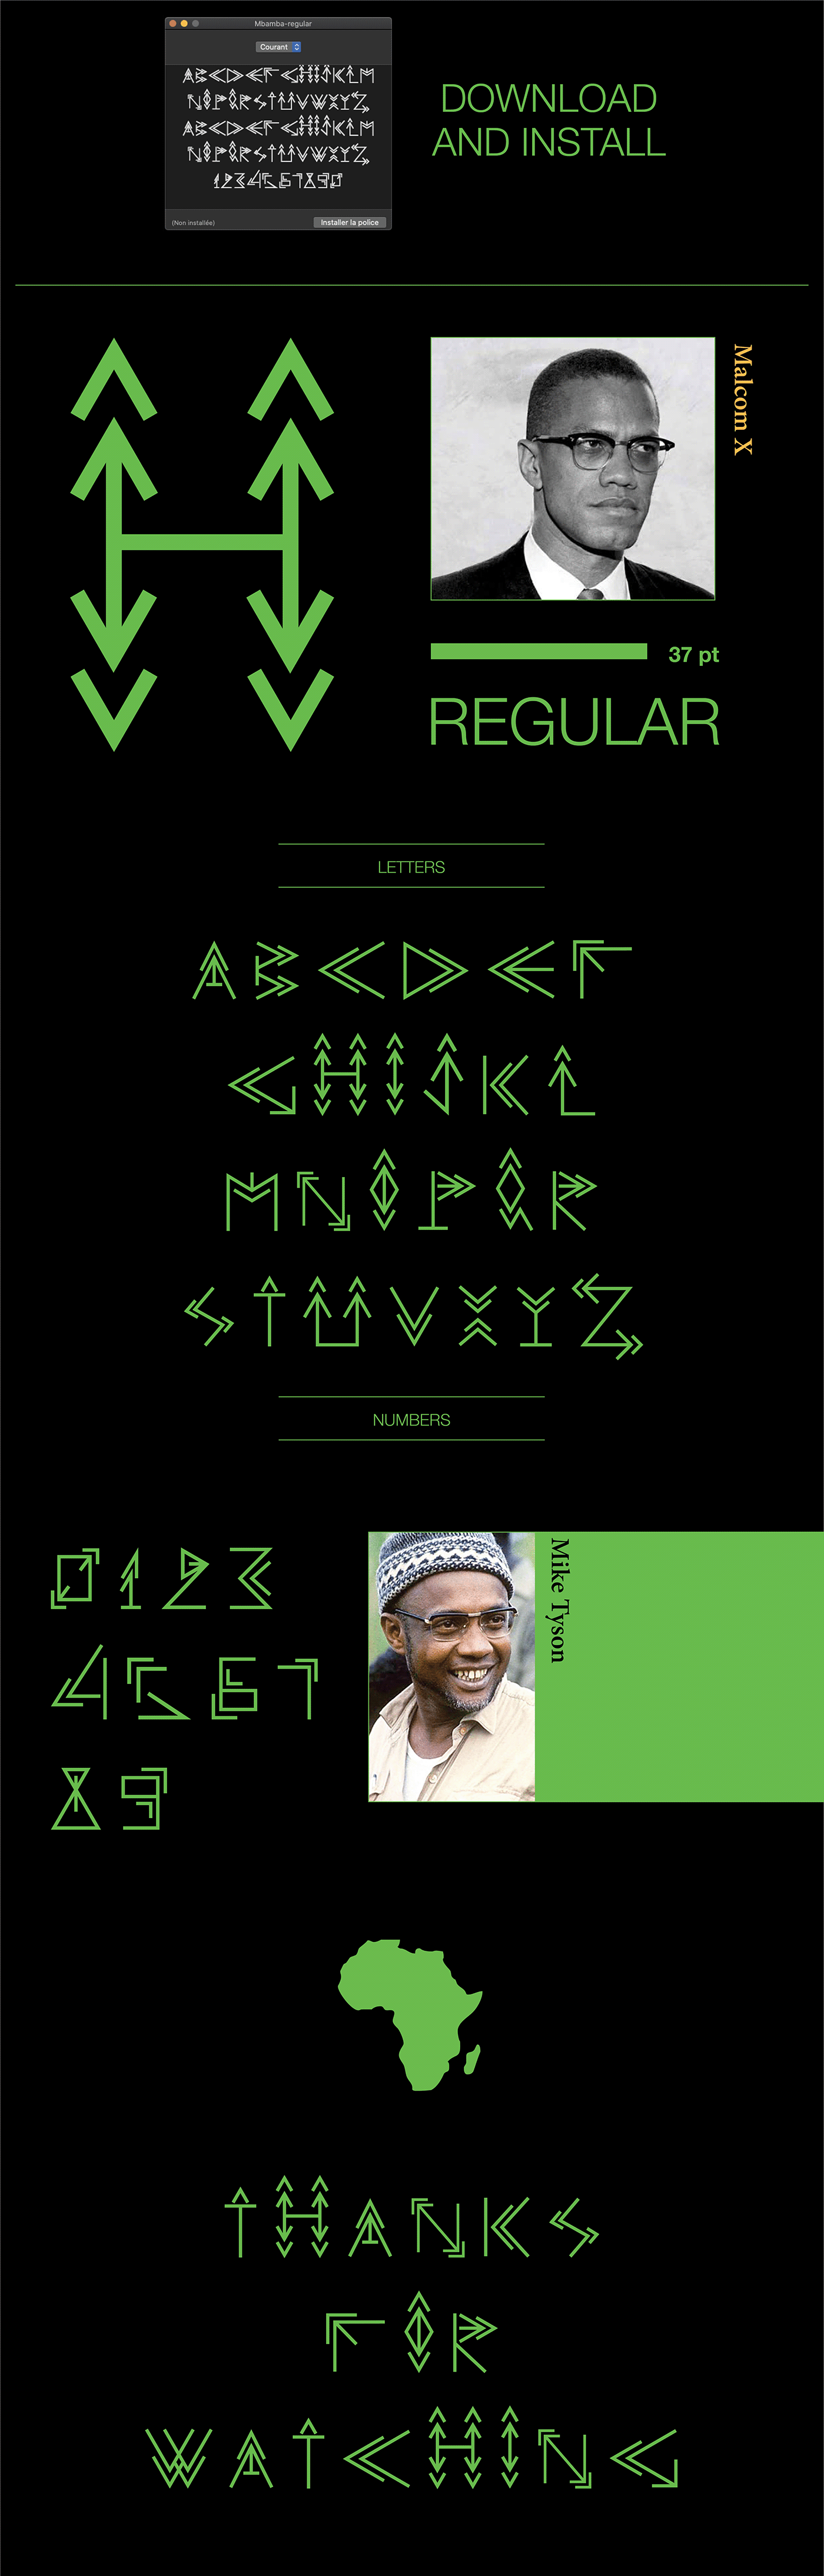 africa africain african afrique graphisme police de caractère type typo typography design